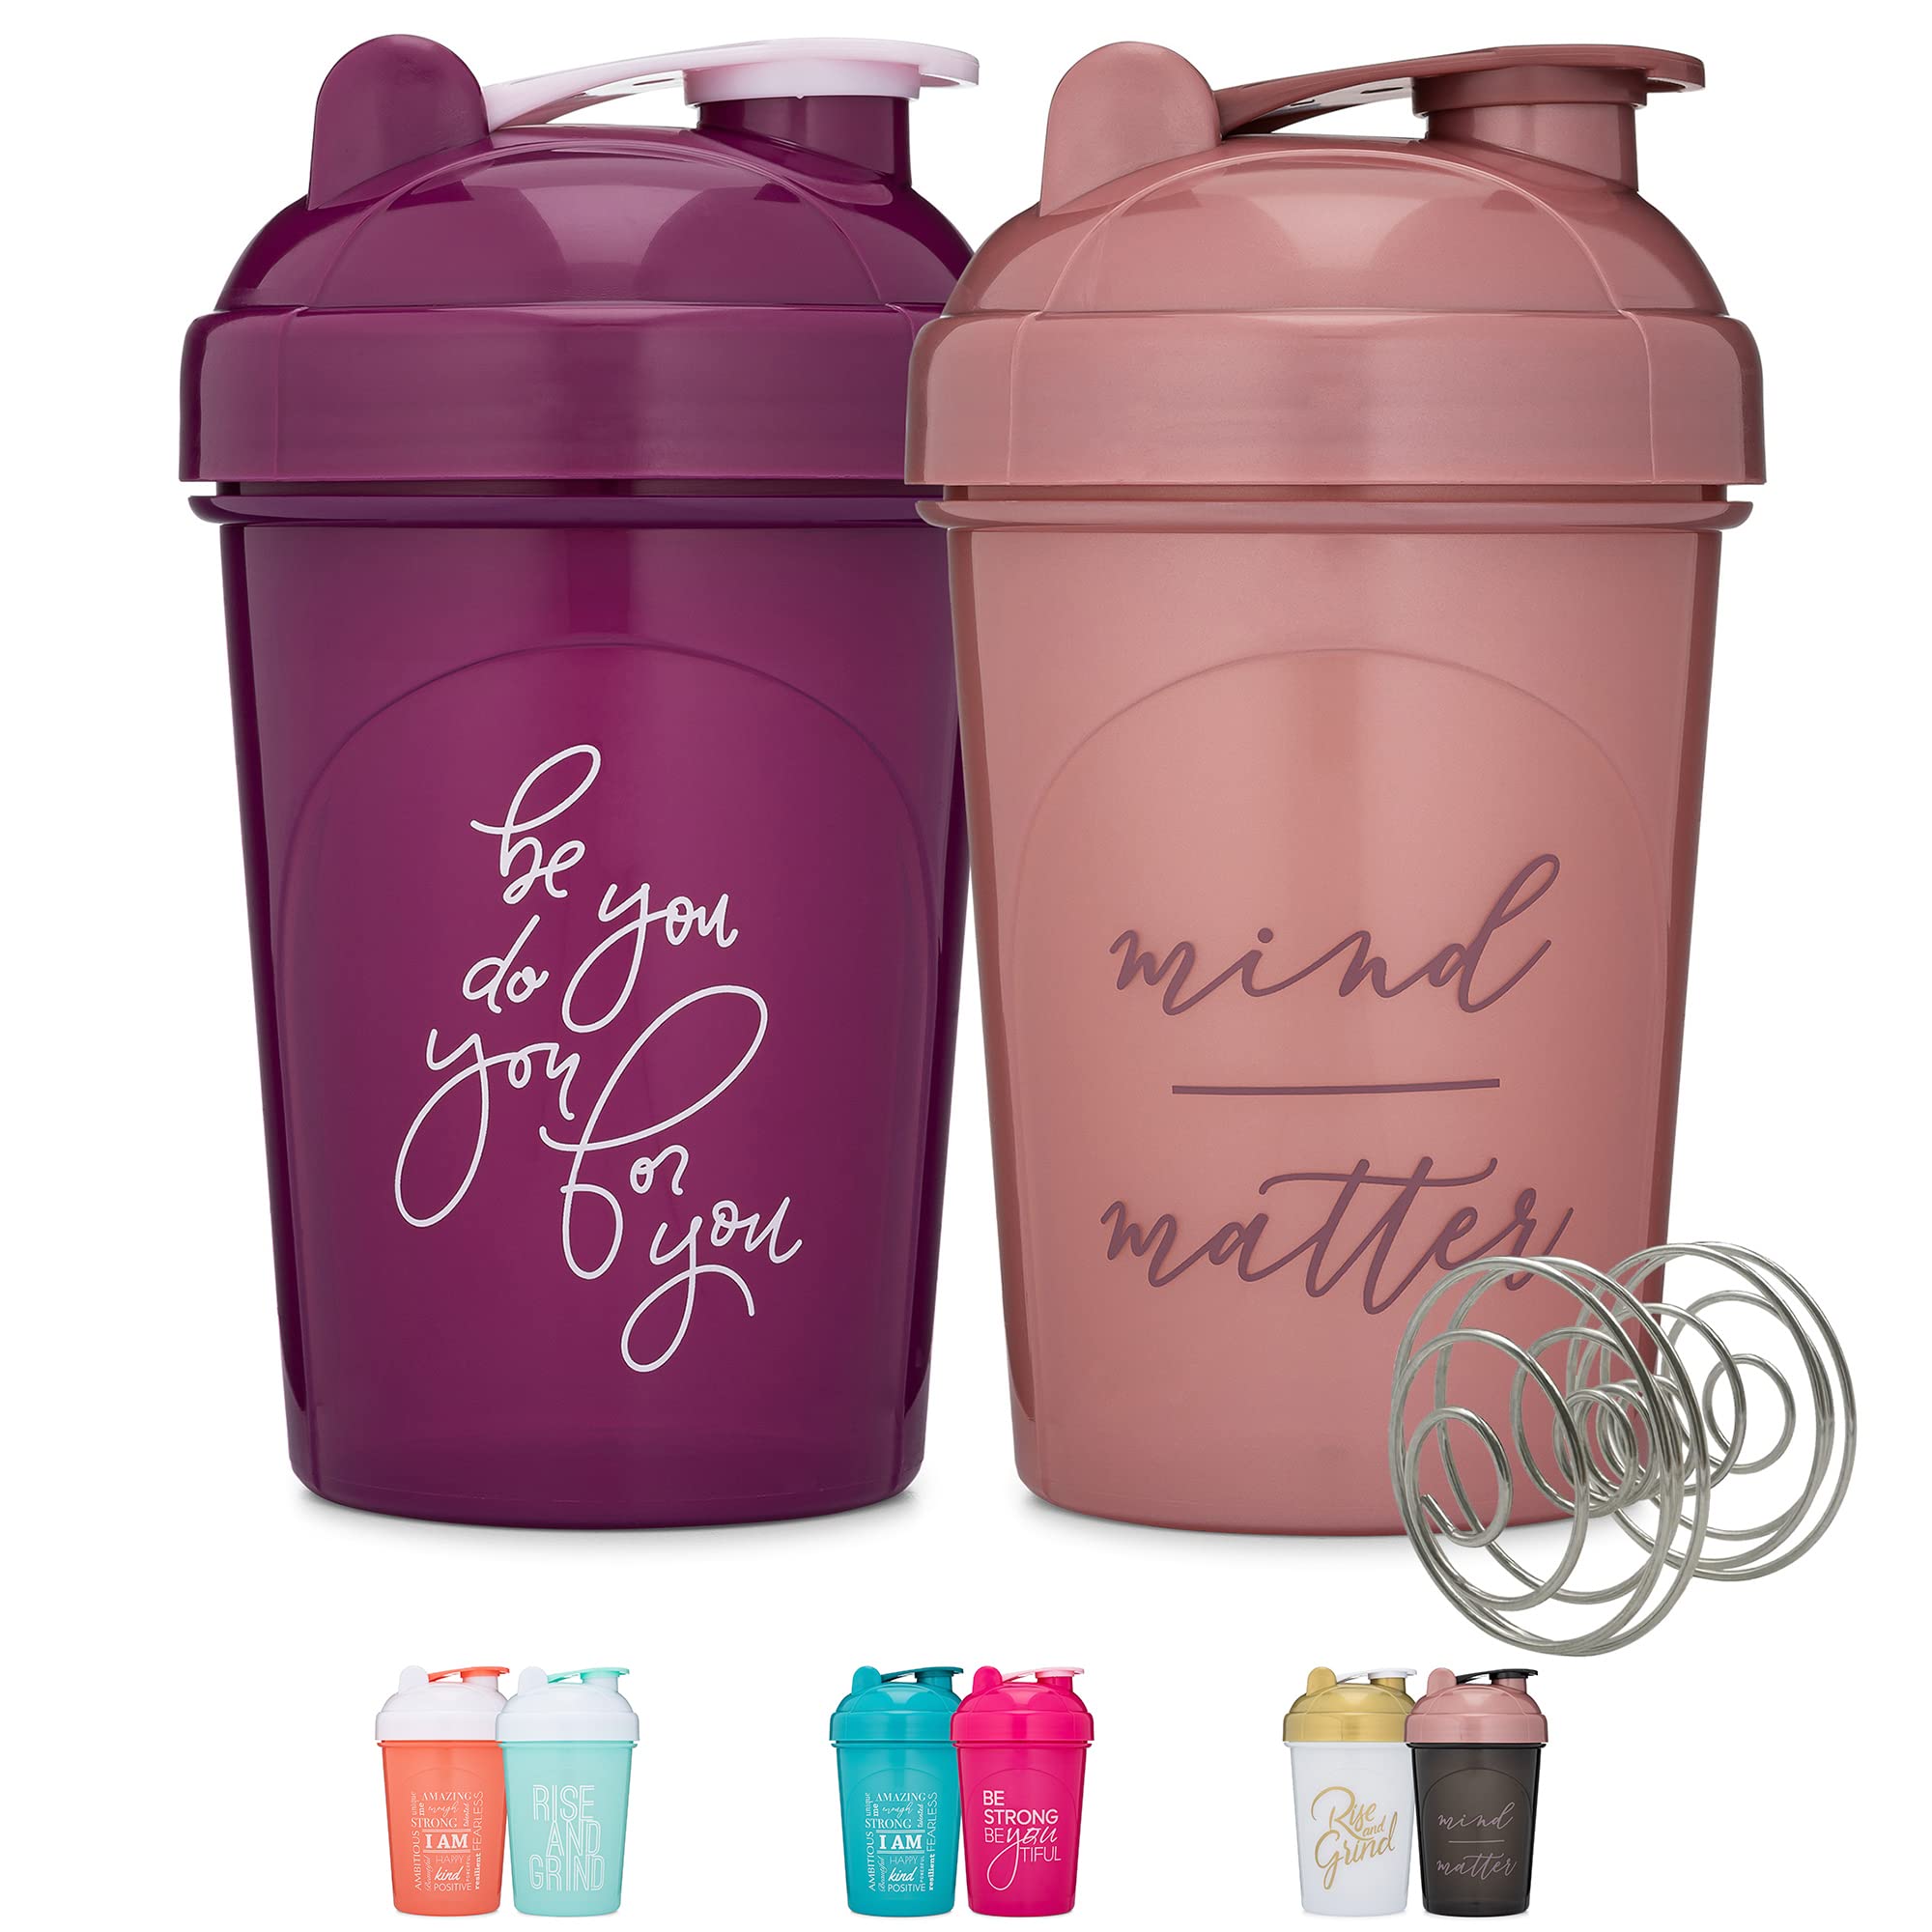 GOMOYO [2 Pack] 28-Ounce Shaker Bottle with Motivational Quotes (Plum &  Black/Rose) | Protein Shaker…See more GOMOYO [2 Pack] 28-Ounce Shaker  Bottle